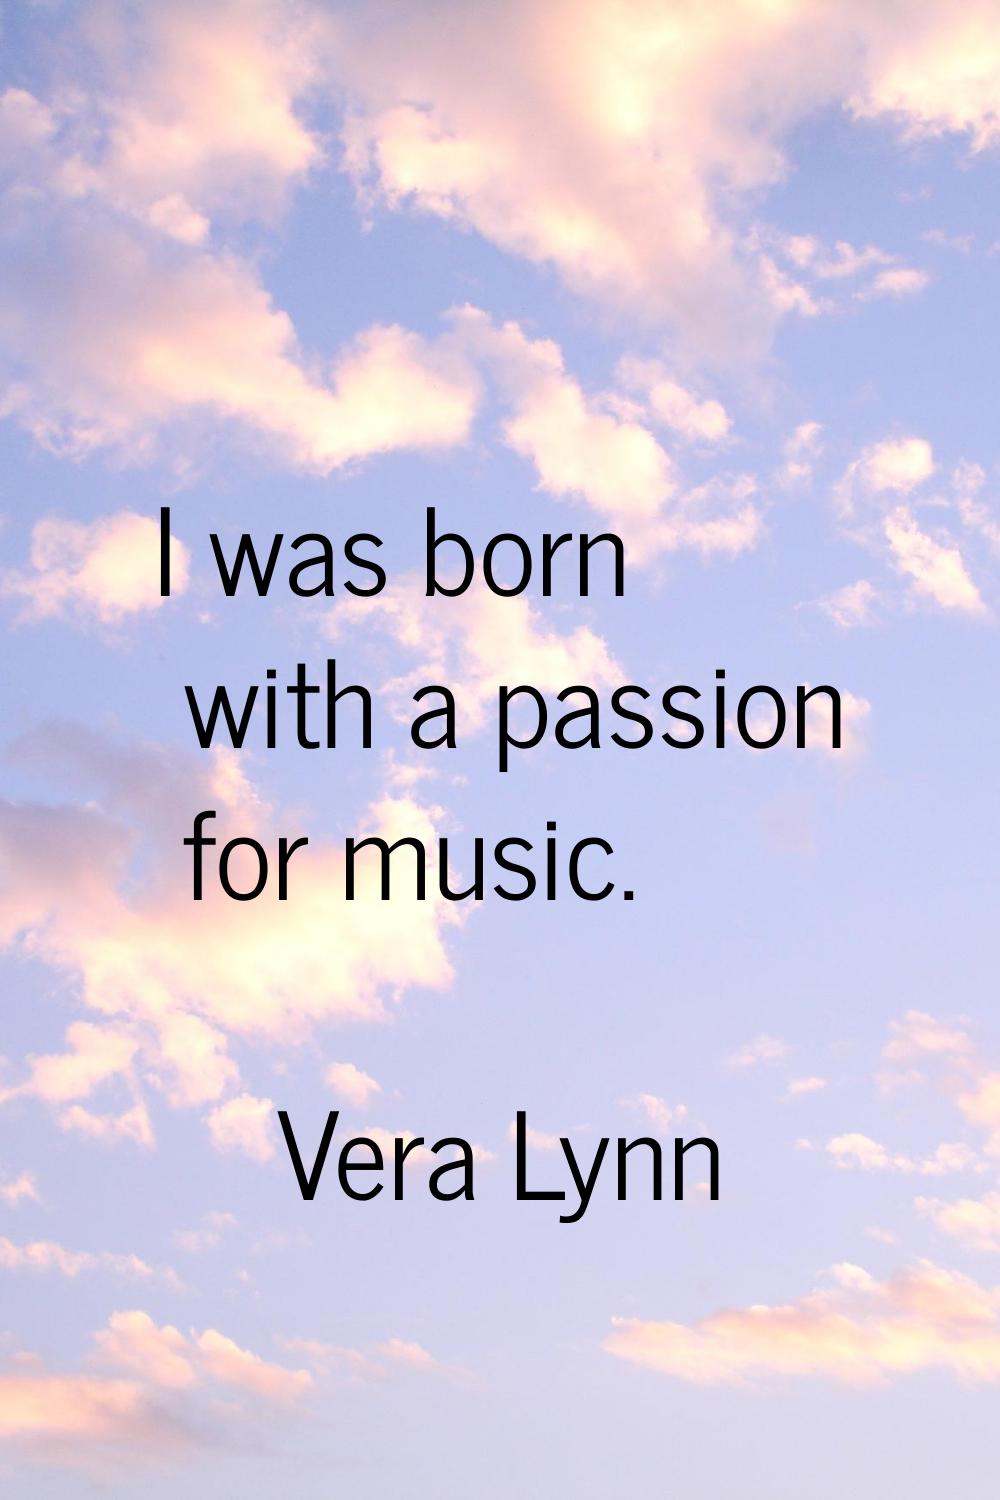 I was born with a passion for music.